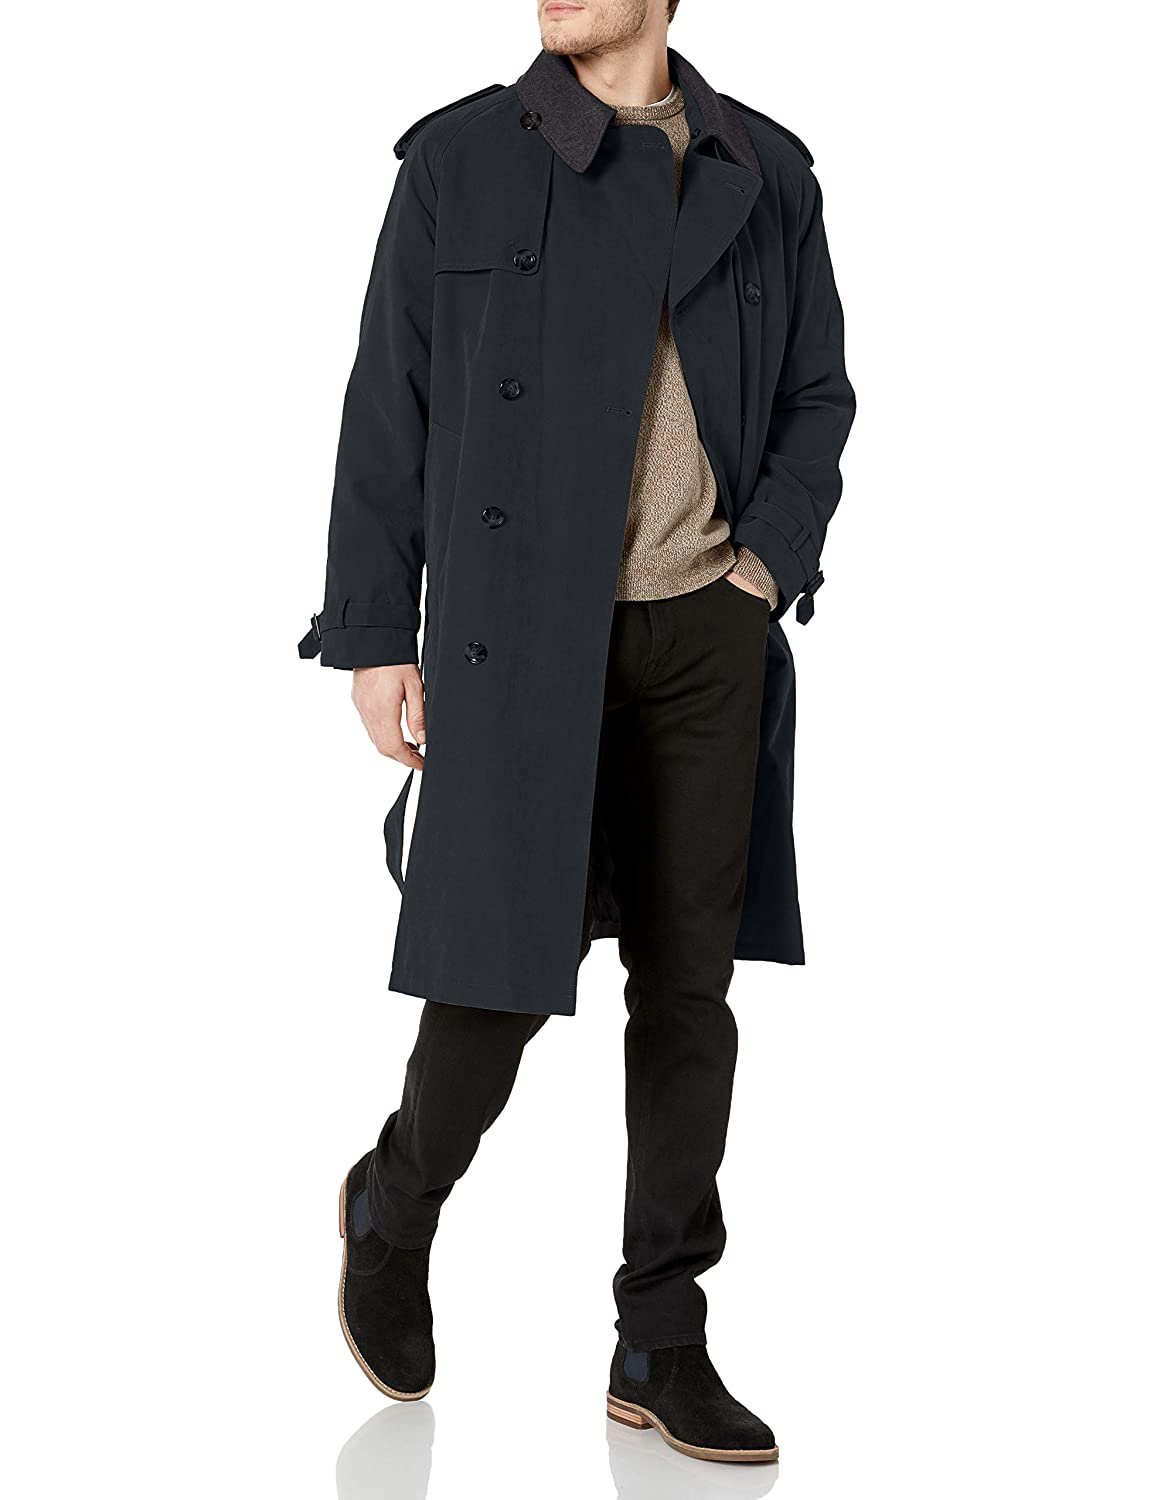 London Fog Men's Raincoat Double Breasted Iconic Trench Coat with 